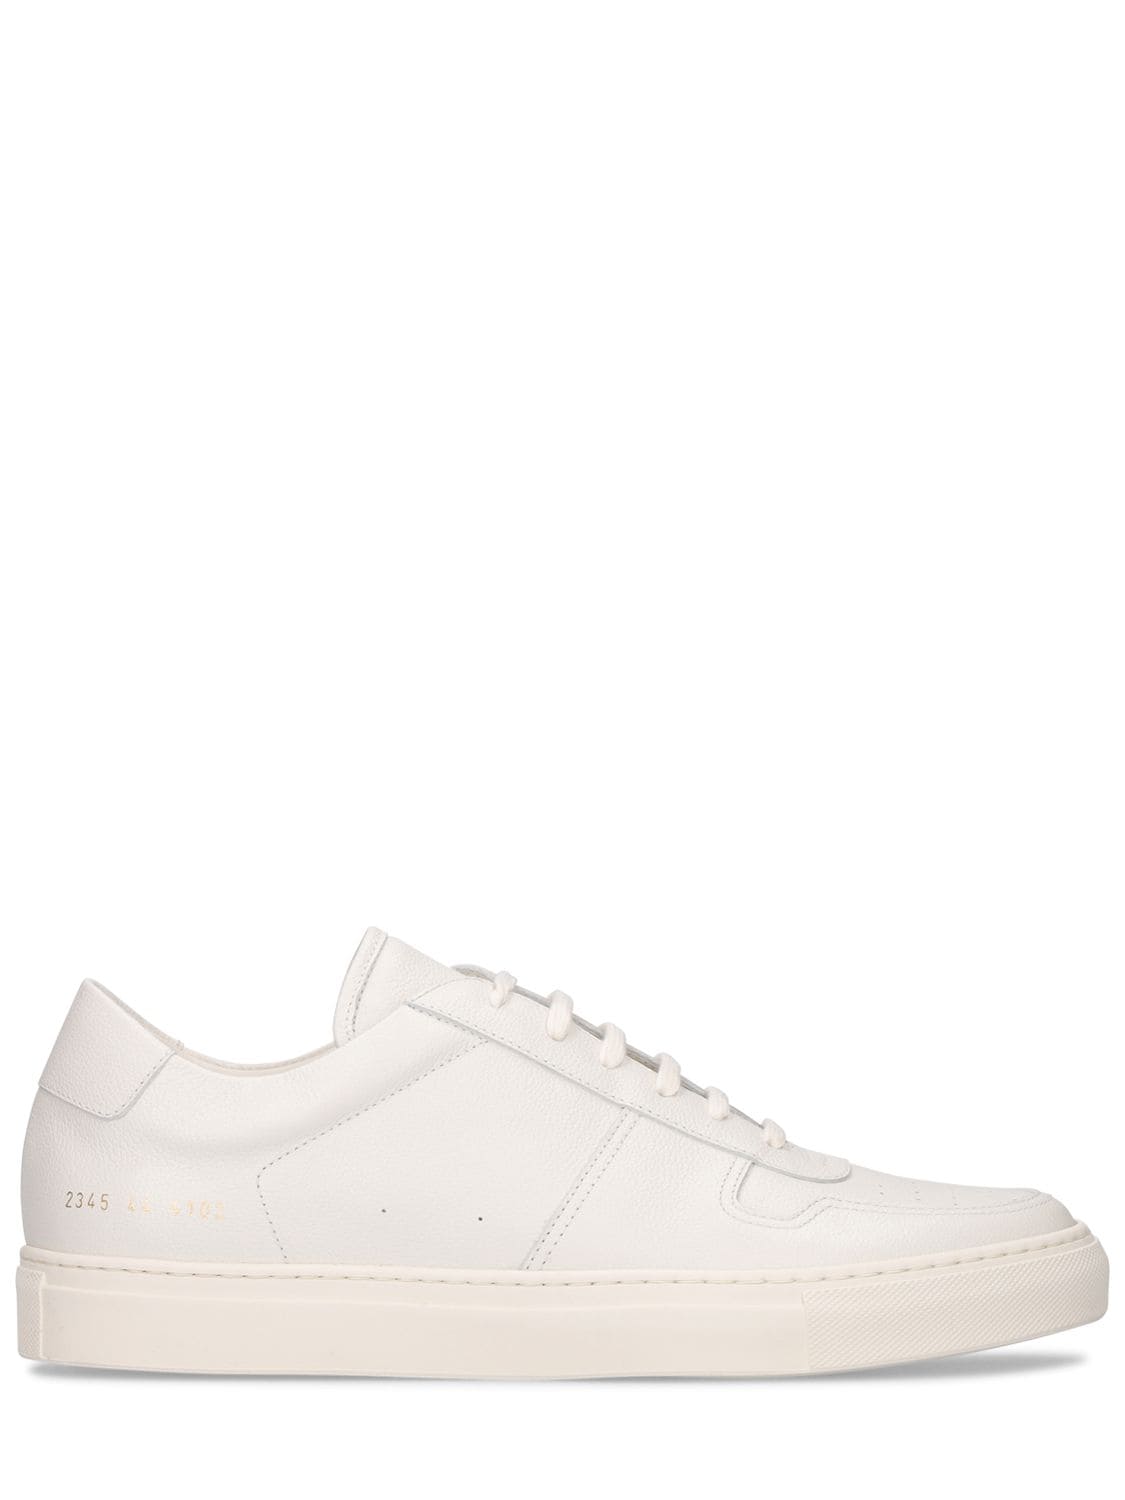 COMMON PROJECTS Bball Low Bumpy Leather Sneakers